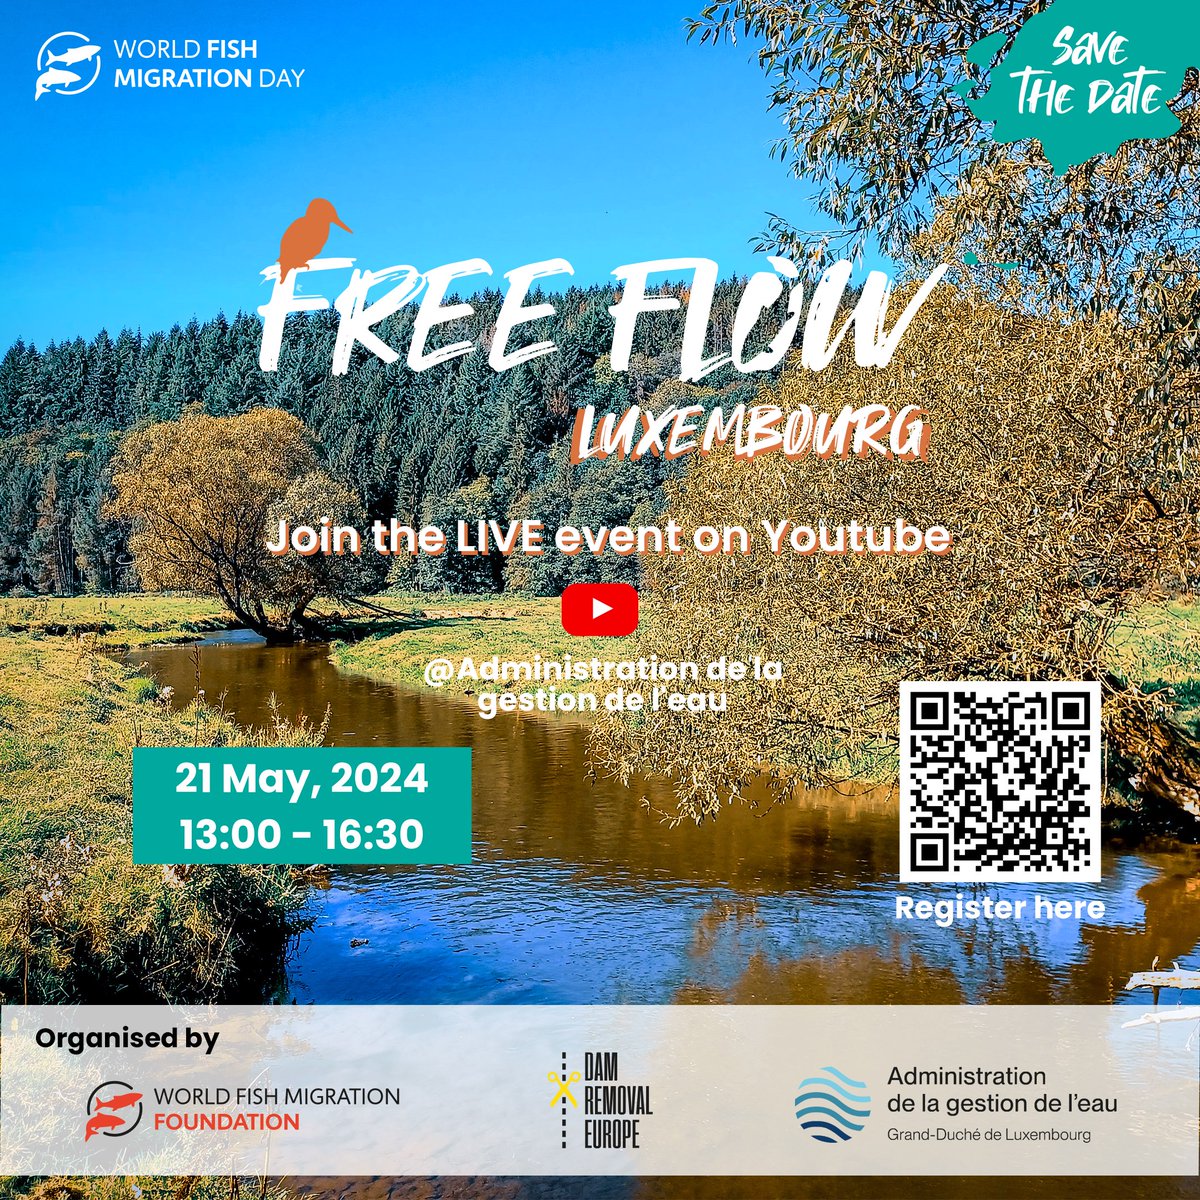 Kick off the #WFMD2024 week with #FreeFlow seminar in Luxembourg!🇱🇺 Join the LIVE seminar on the YouTube channel of the Administration de la gestion de l'eau - @environment_lu at 13:00-16:30 CEST ➡️ Learn more at damremoval.eu/seminar-freefl… #damremoval #riverrestoration